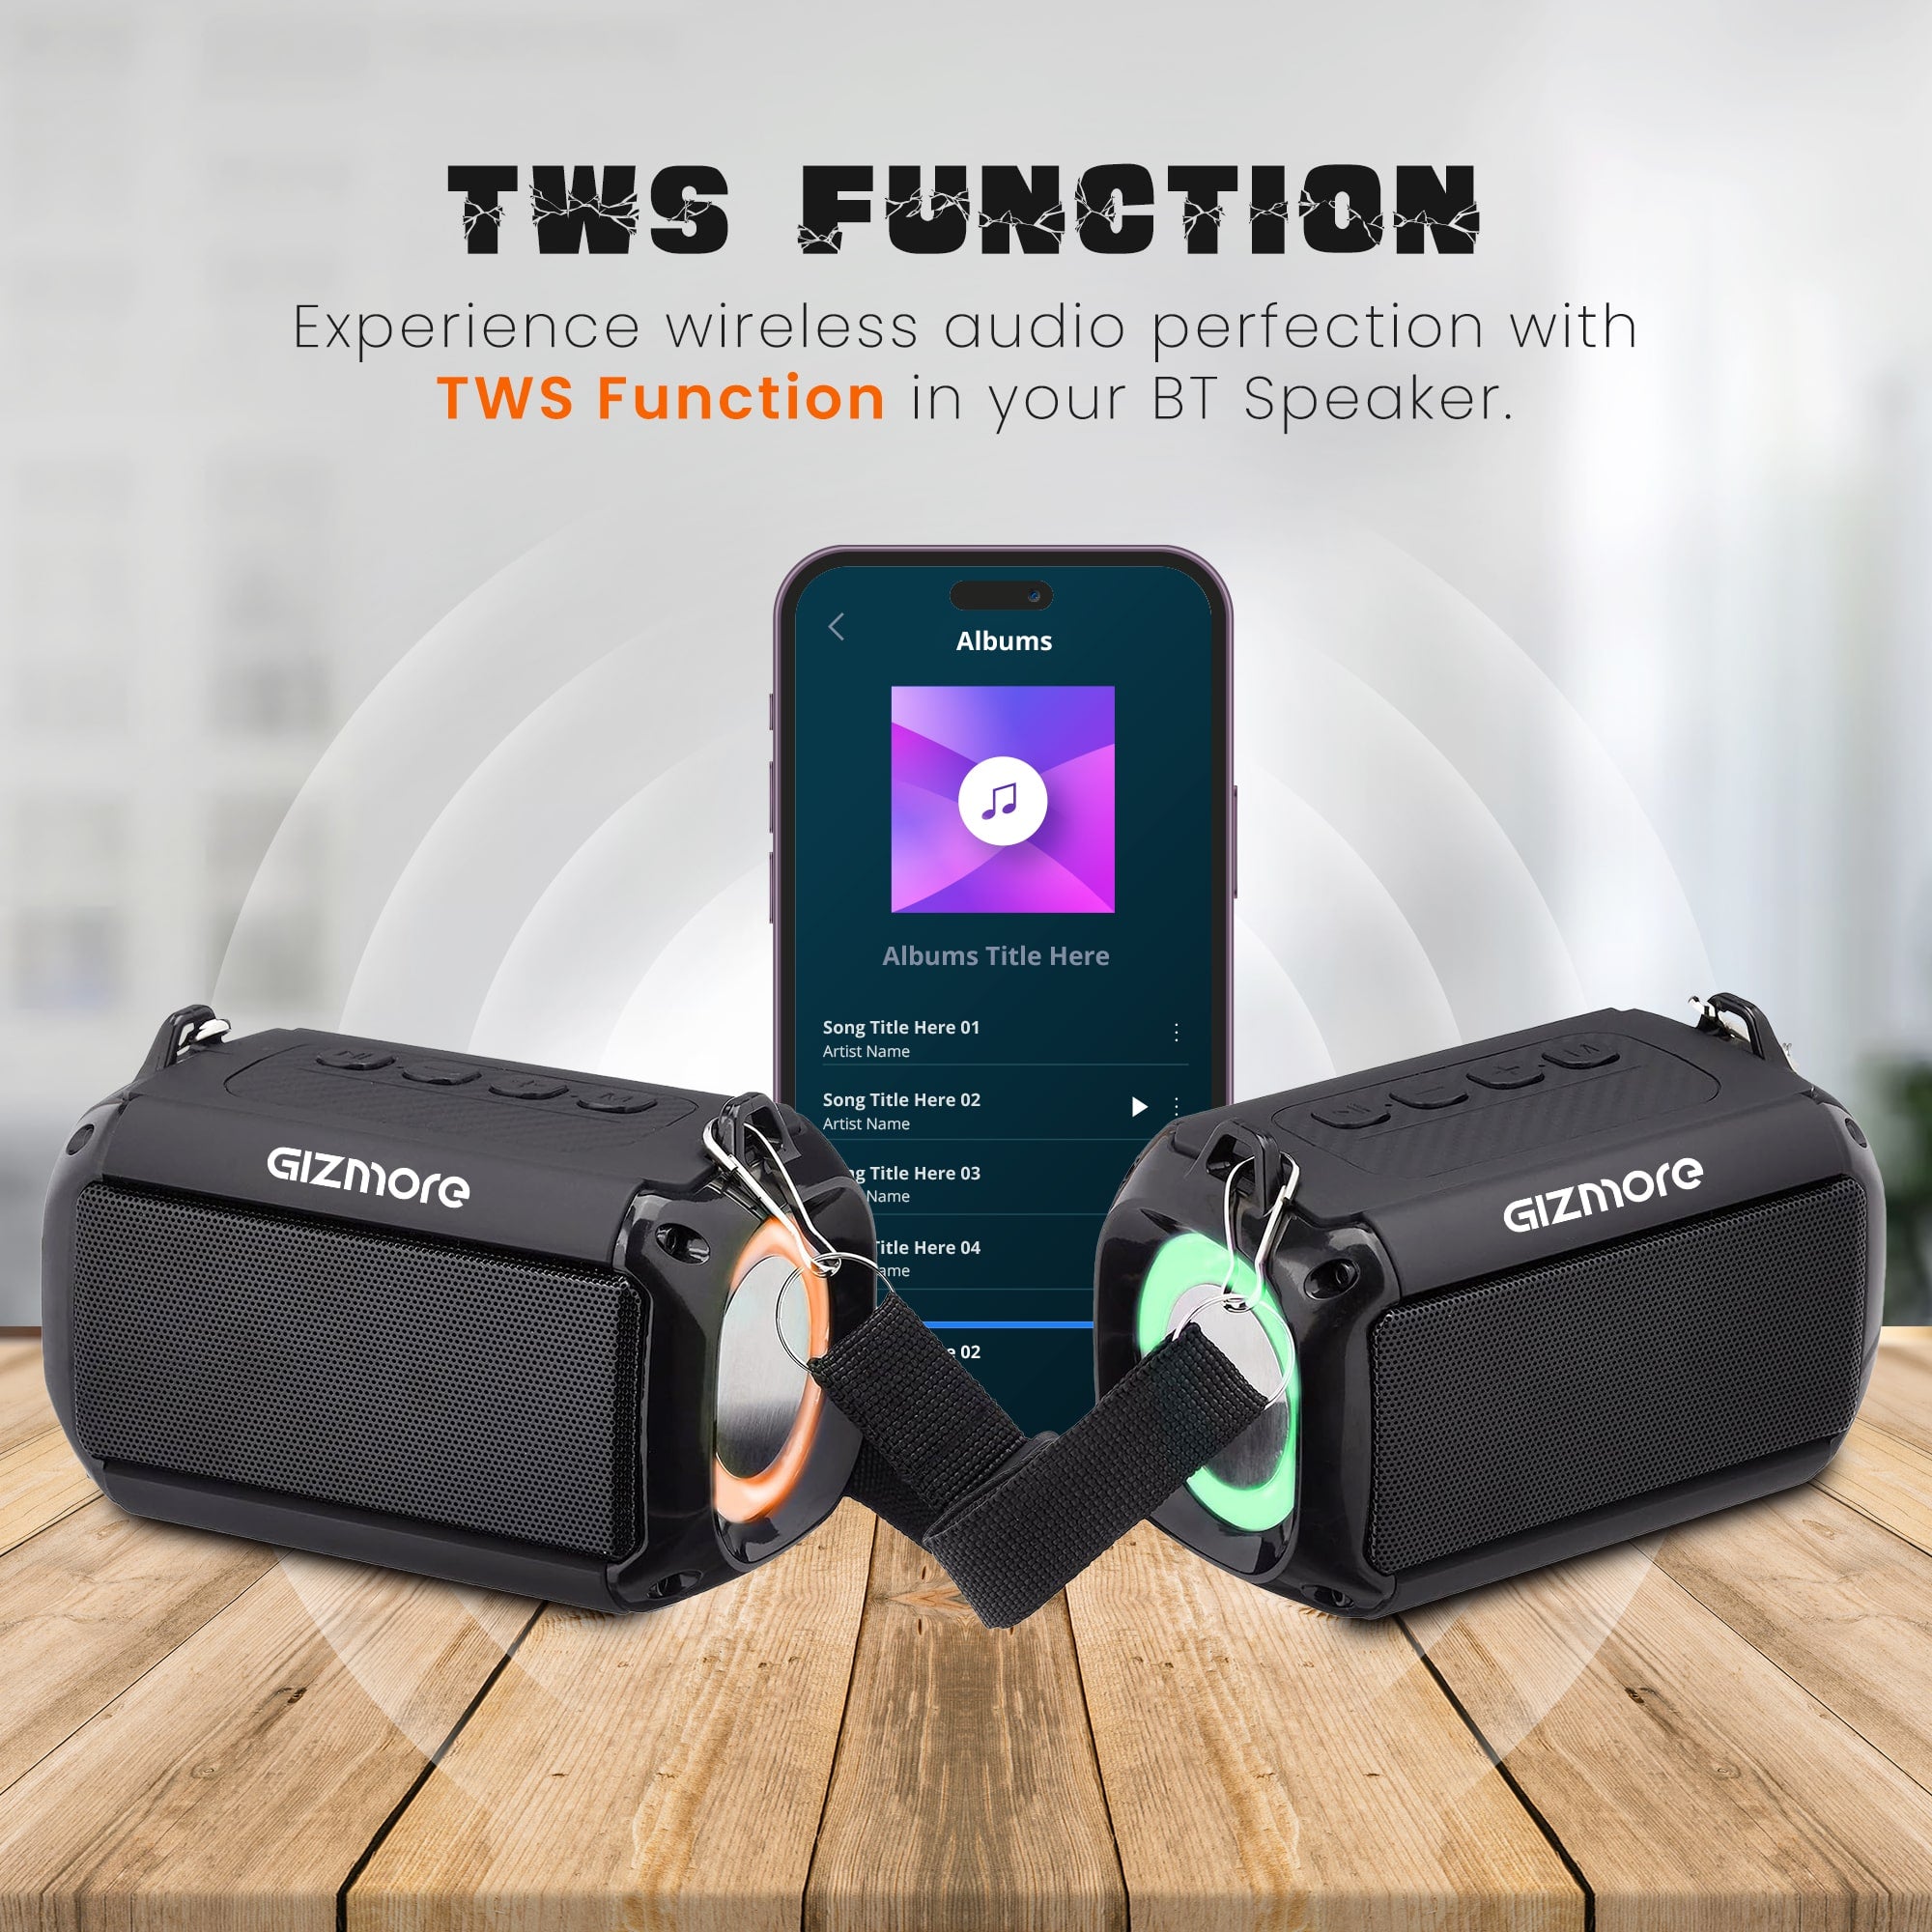 GIZMORE MS510 DYNAMITE 10W BT Speaker, 14 Hrs Playtime with TWS Function, RGB Lights, Dynamic Bass, Rubber Finish, Multiple Connectivity (BT, AUX, USB, SD Card), Volume Control and Noise Cancelling Mic (Black)